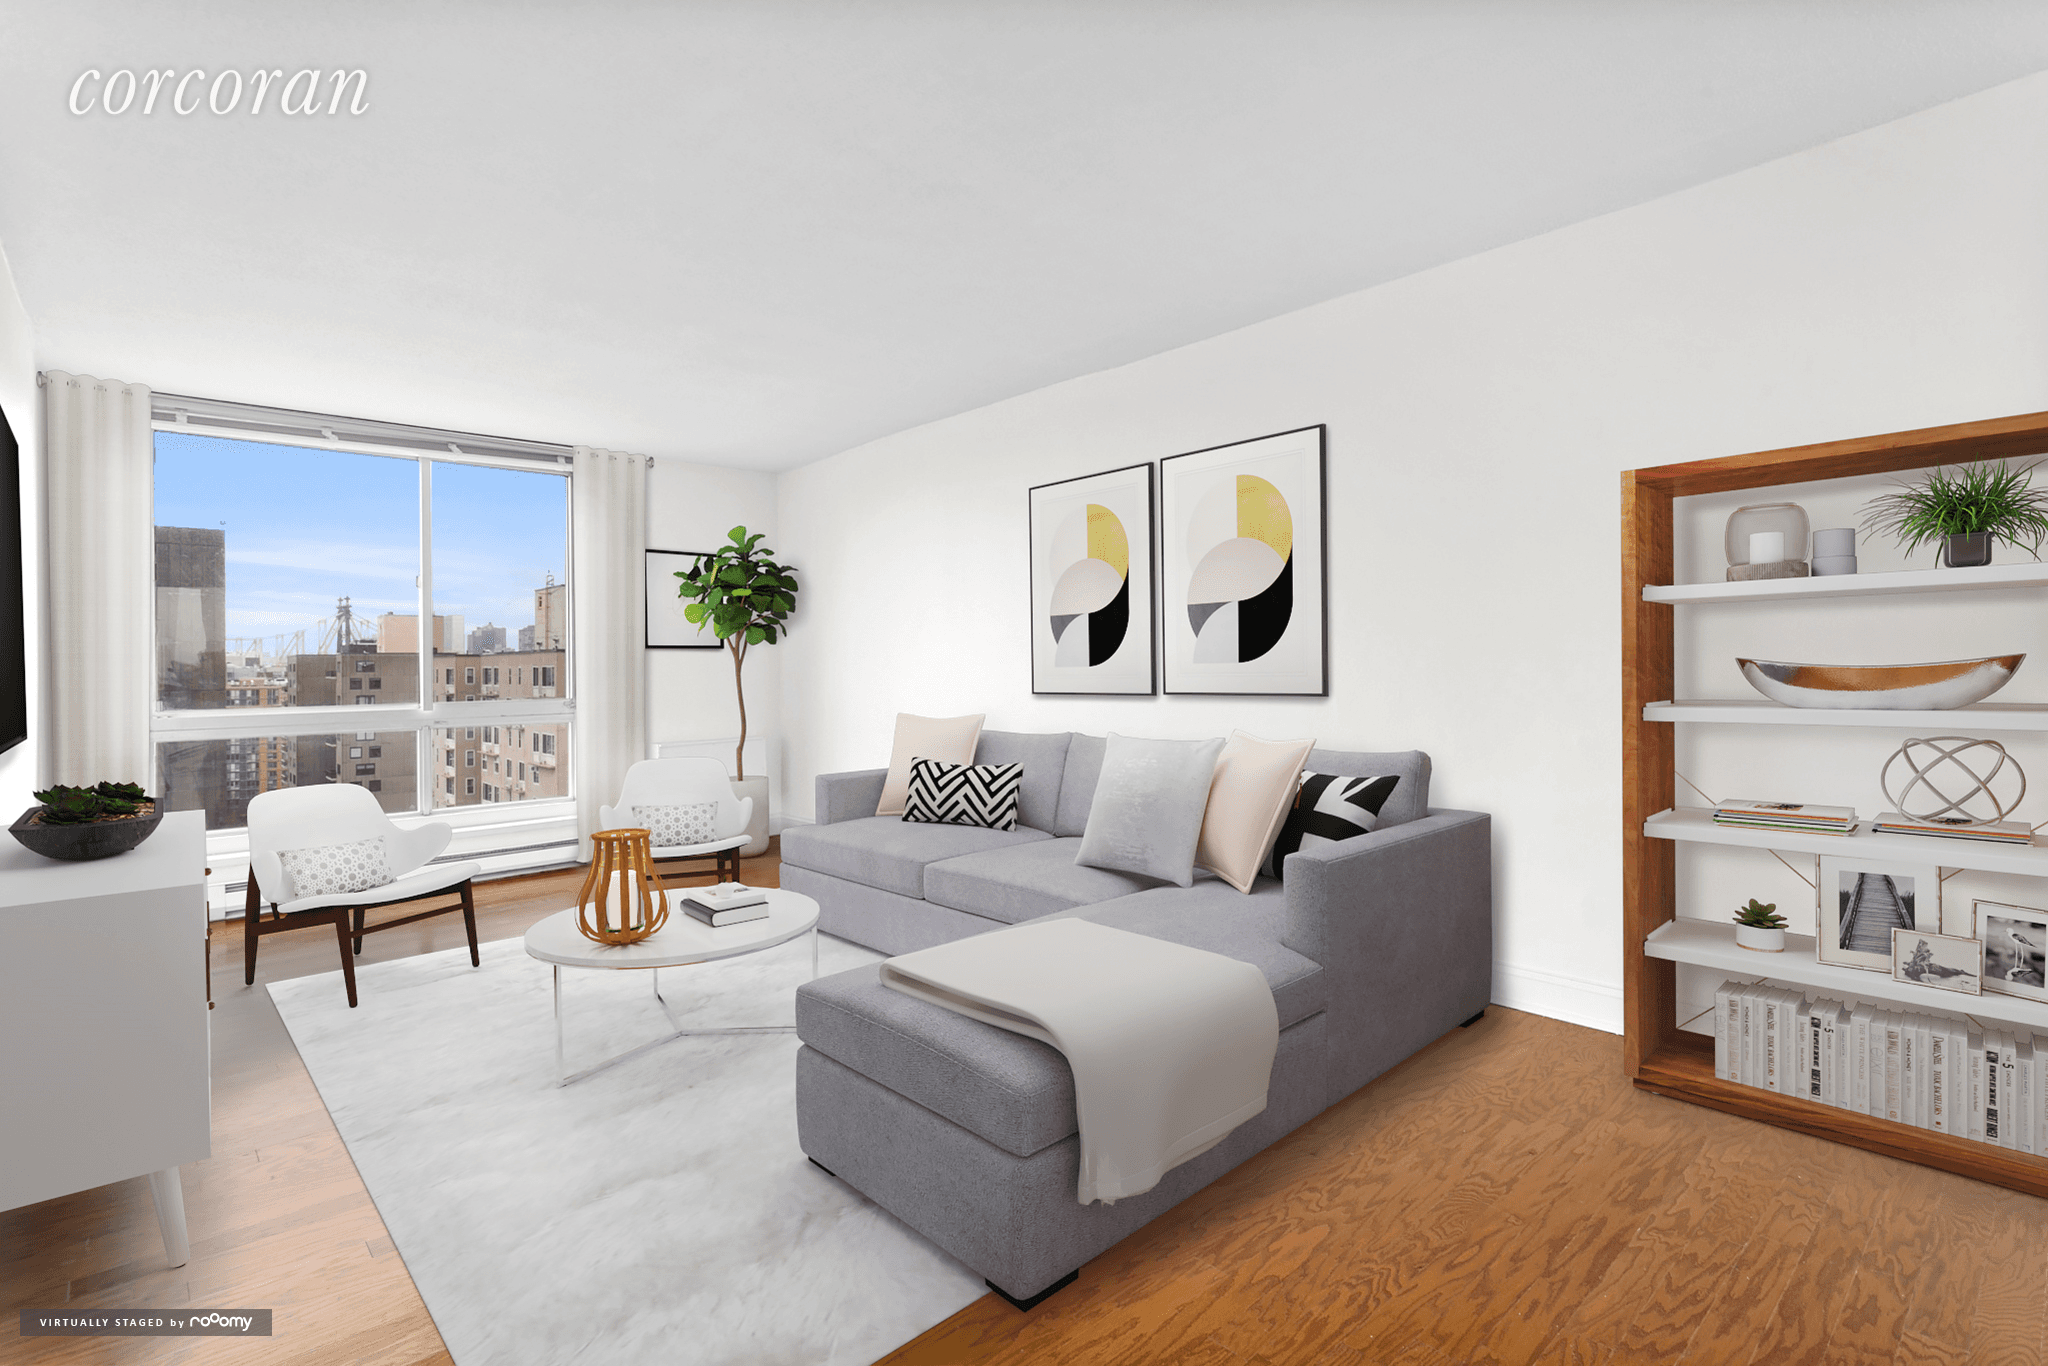 Beautiful Oversized 10th Floor Home with Floor to Ceiling WindowLimited Time Offer No Broker Fee and 1 Month Free 2 BR 1 BathBe in the center of NYC at Roosevelt ...